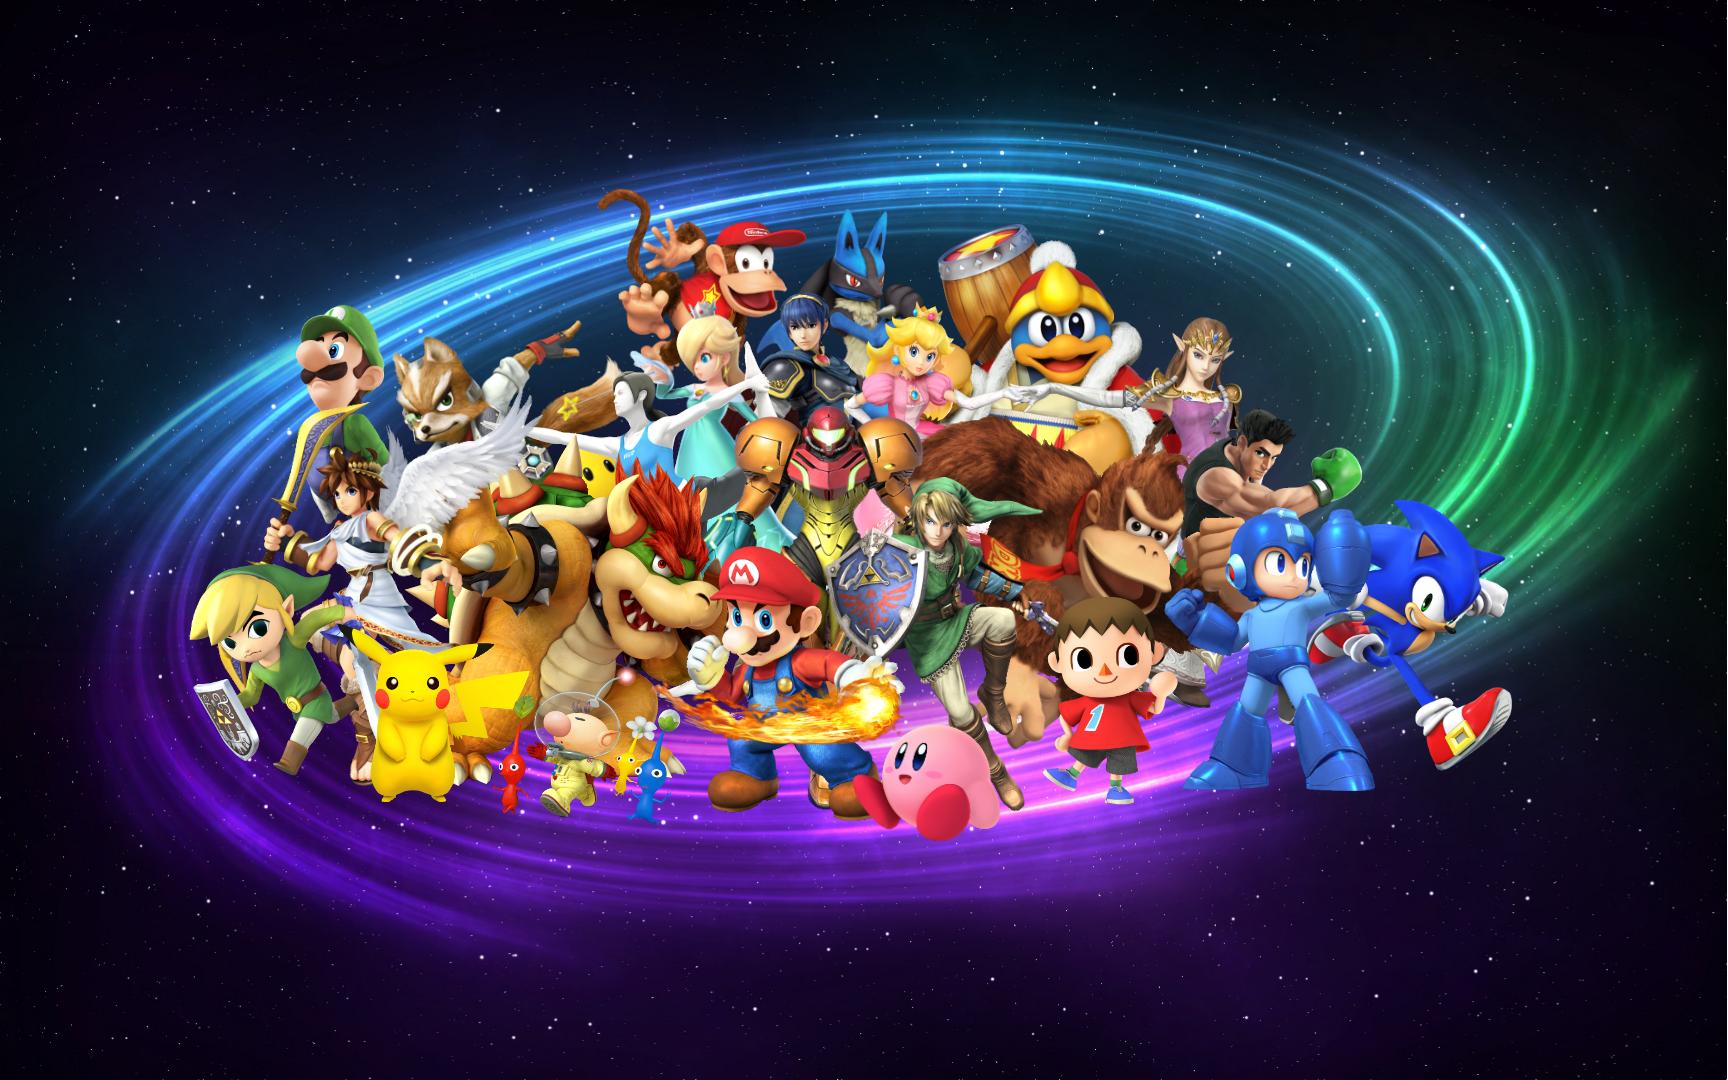 Ssb4 New Super Smash Bros Wallpaper Updated With Diddy Kong 1080p